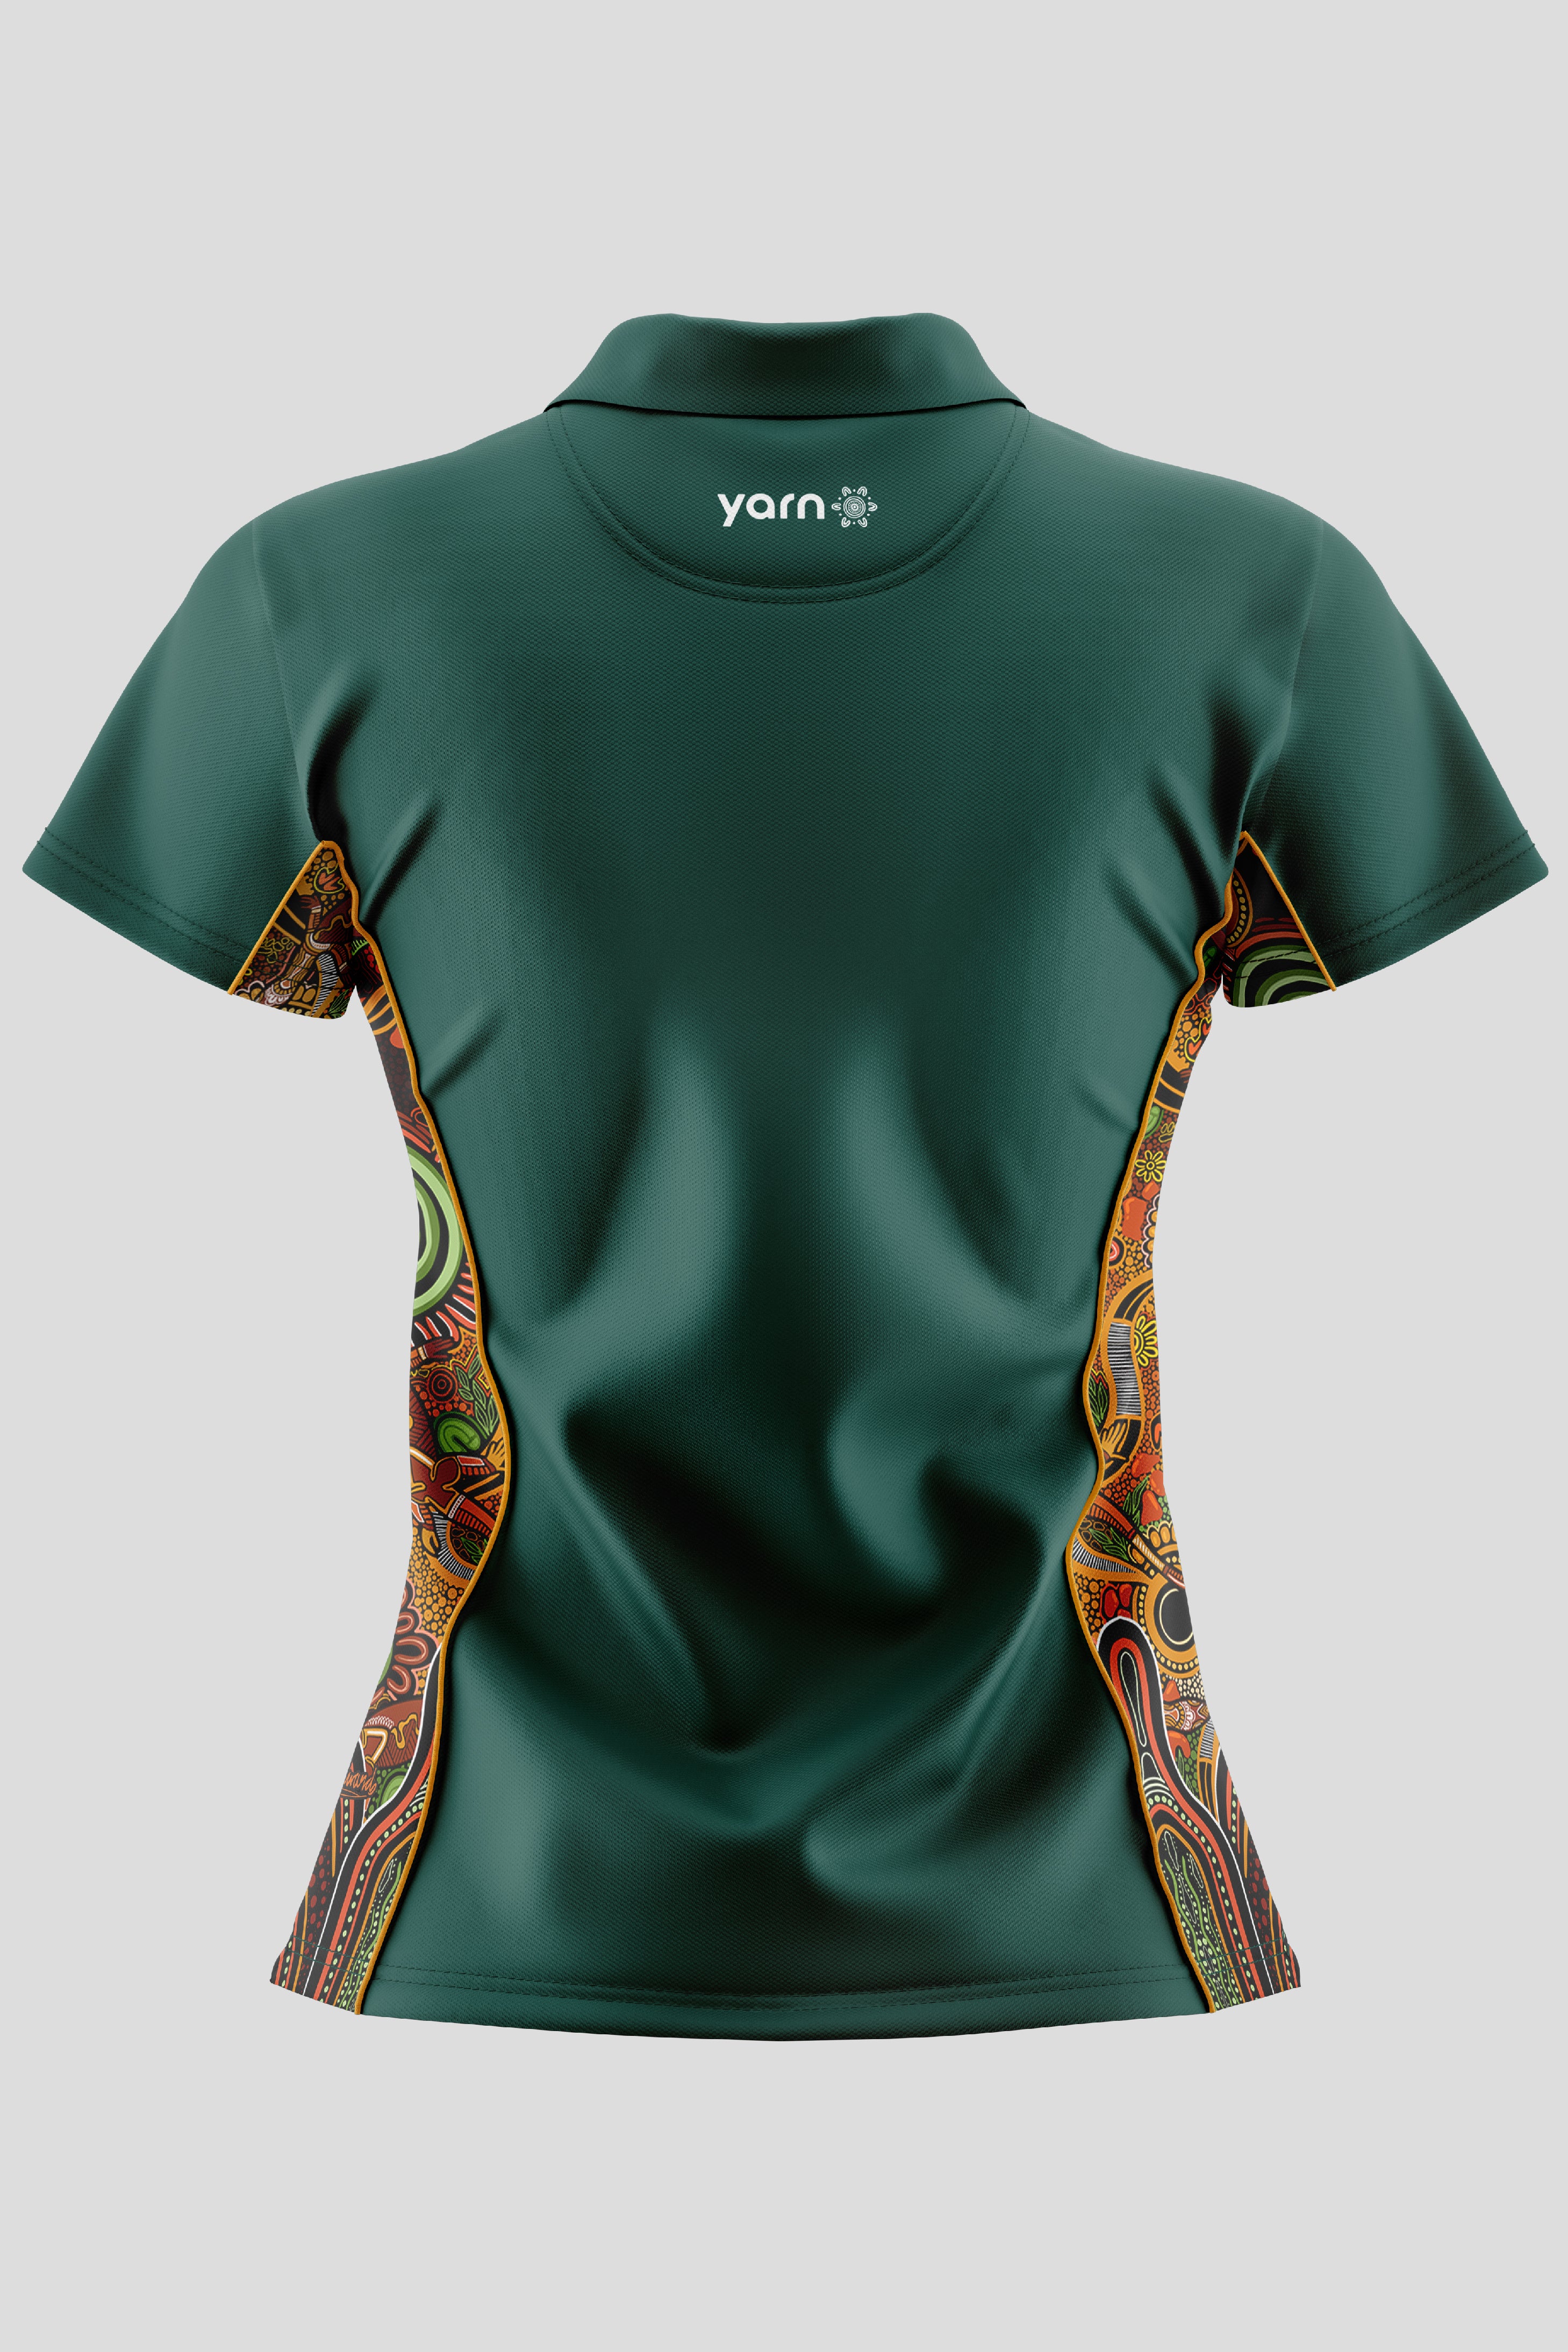 Proud & Deadly NAIDOC 2024 Forest Green Bamboo (Simpson) Polo Shirt